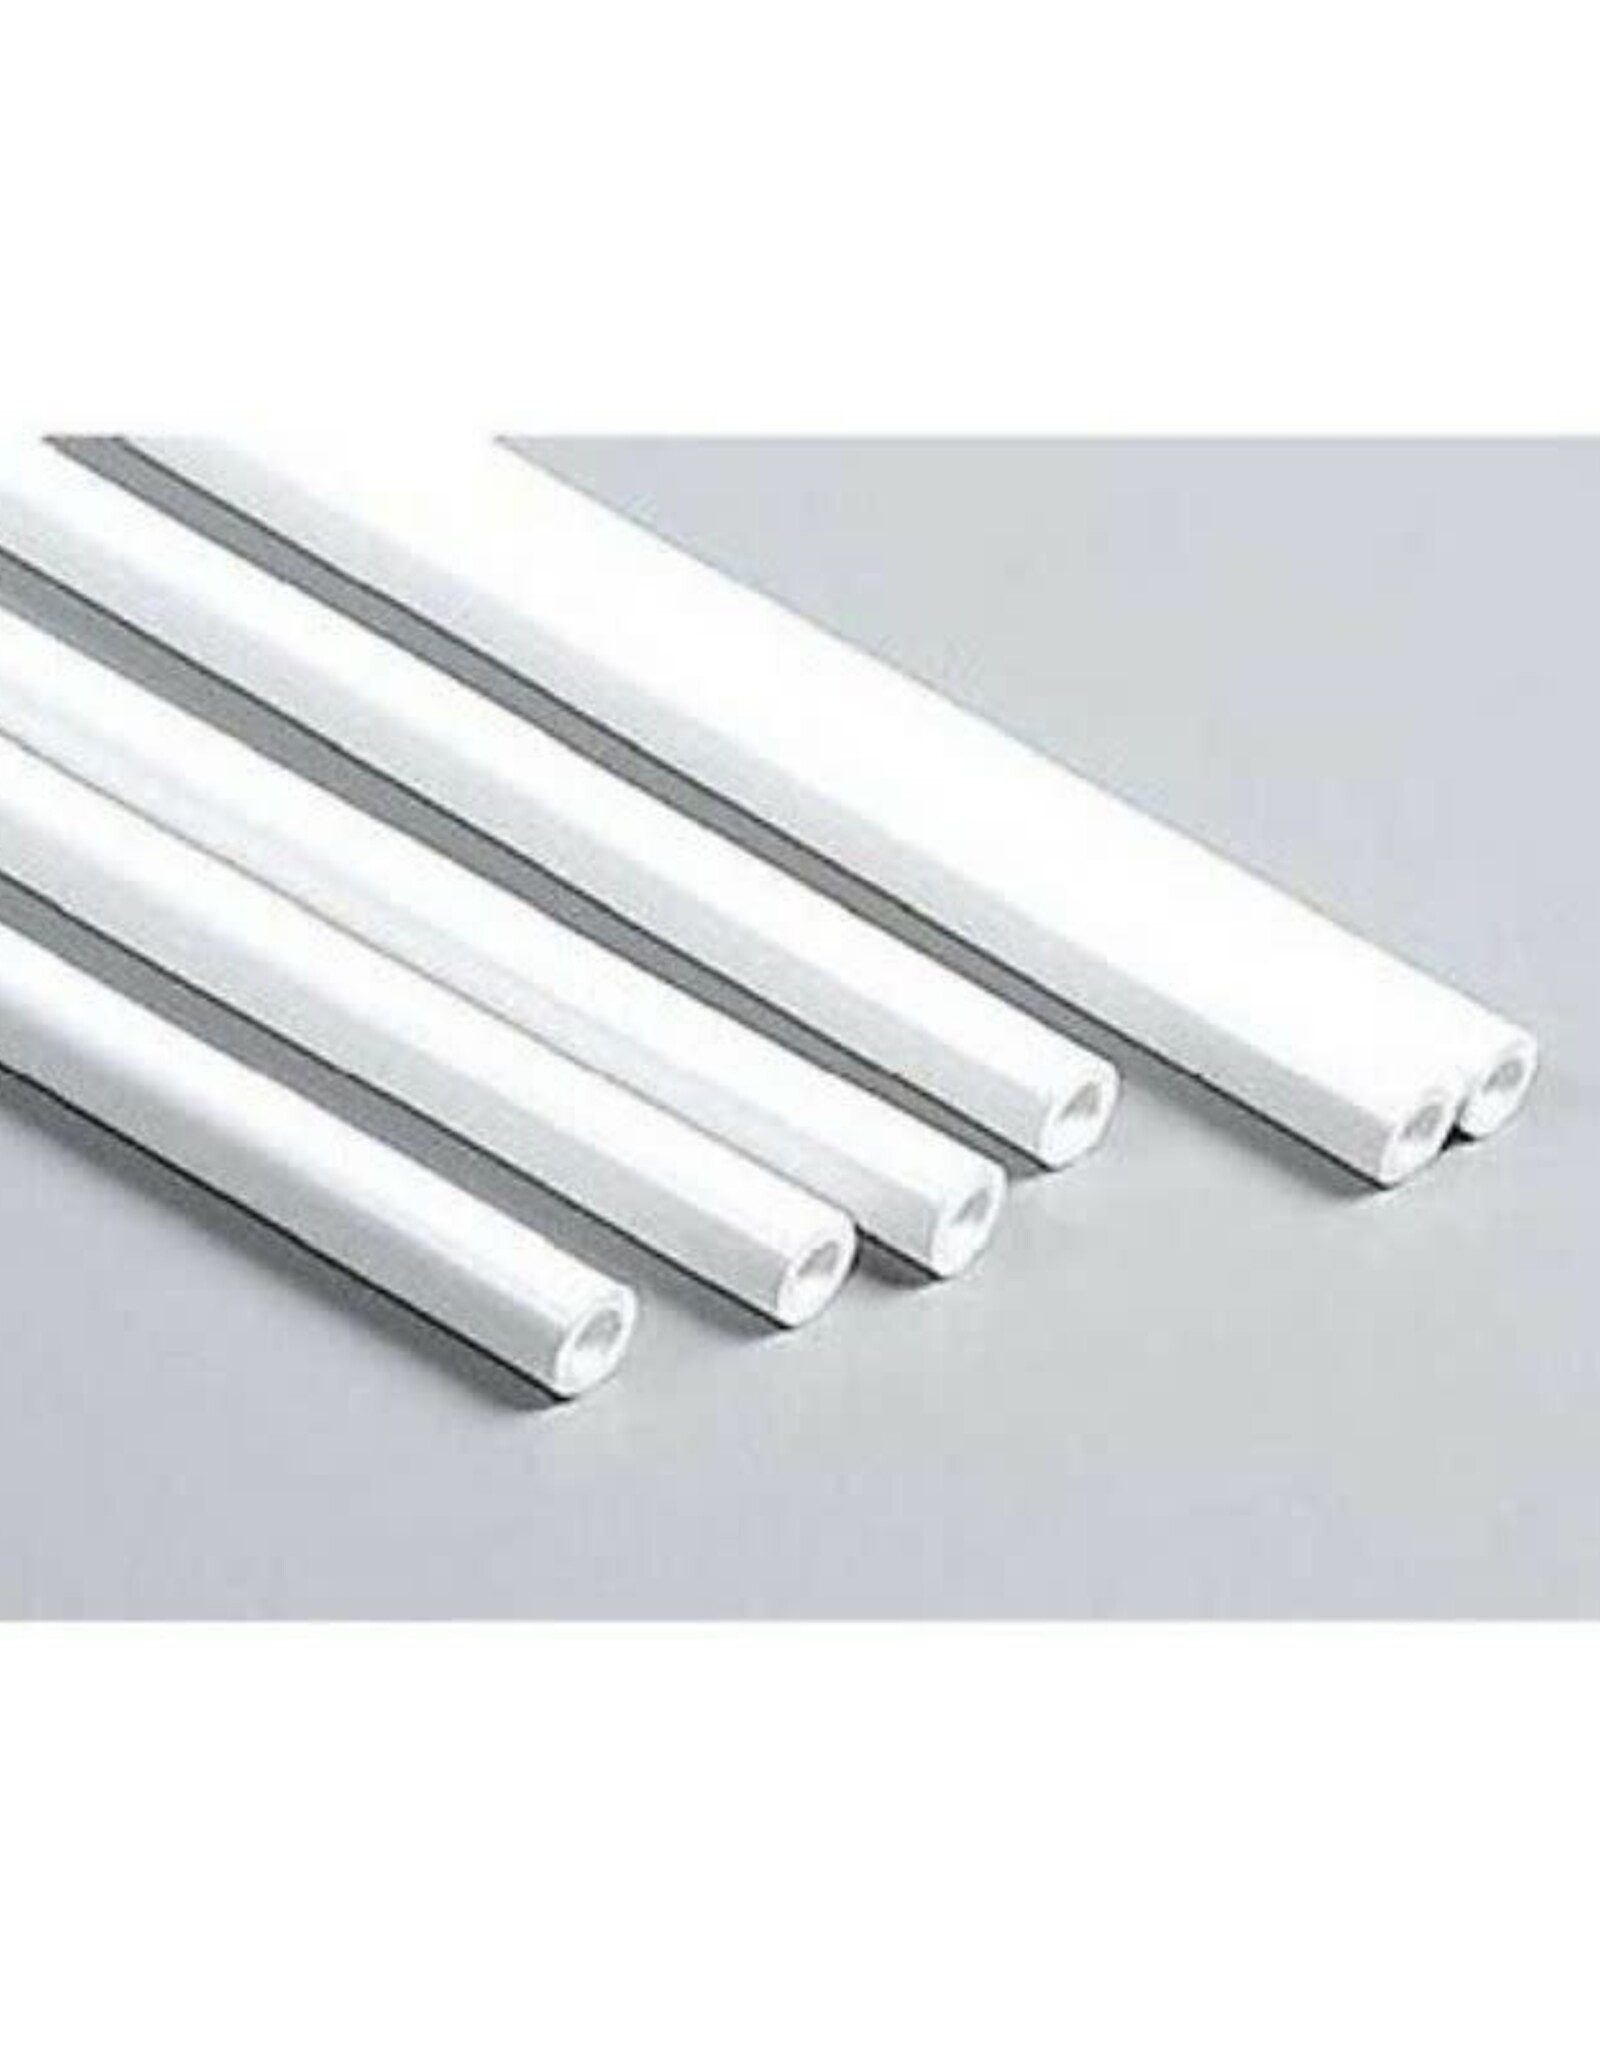 Butyrate Tubing (5/16", 6 pieces)